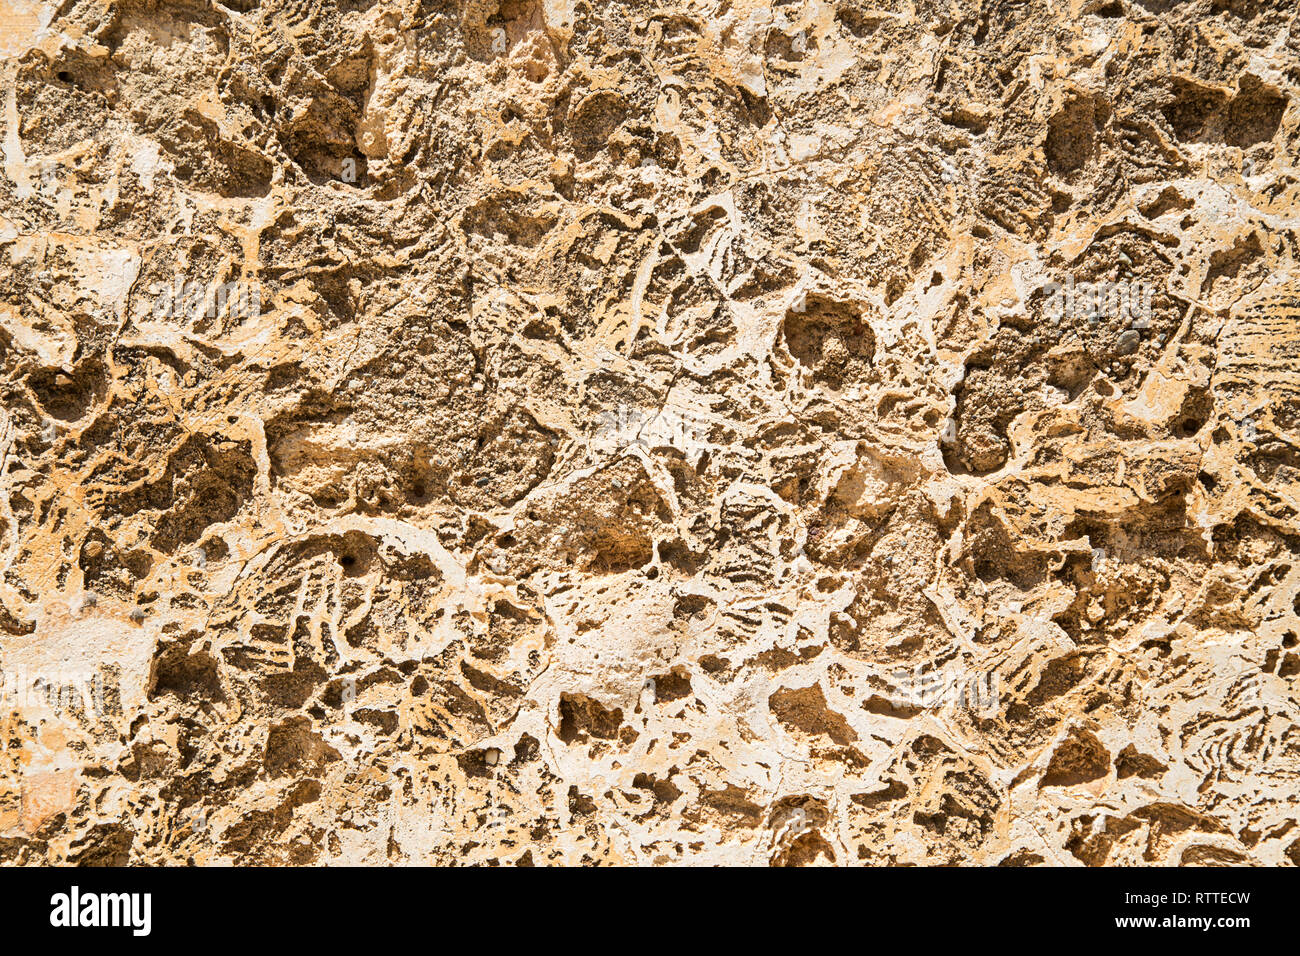 Rustic stone surface texture Stock Photo